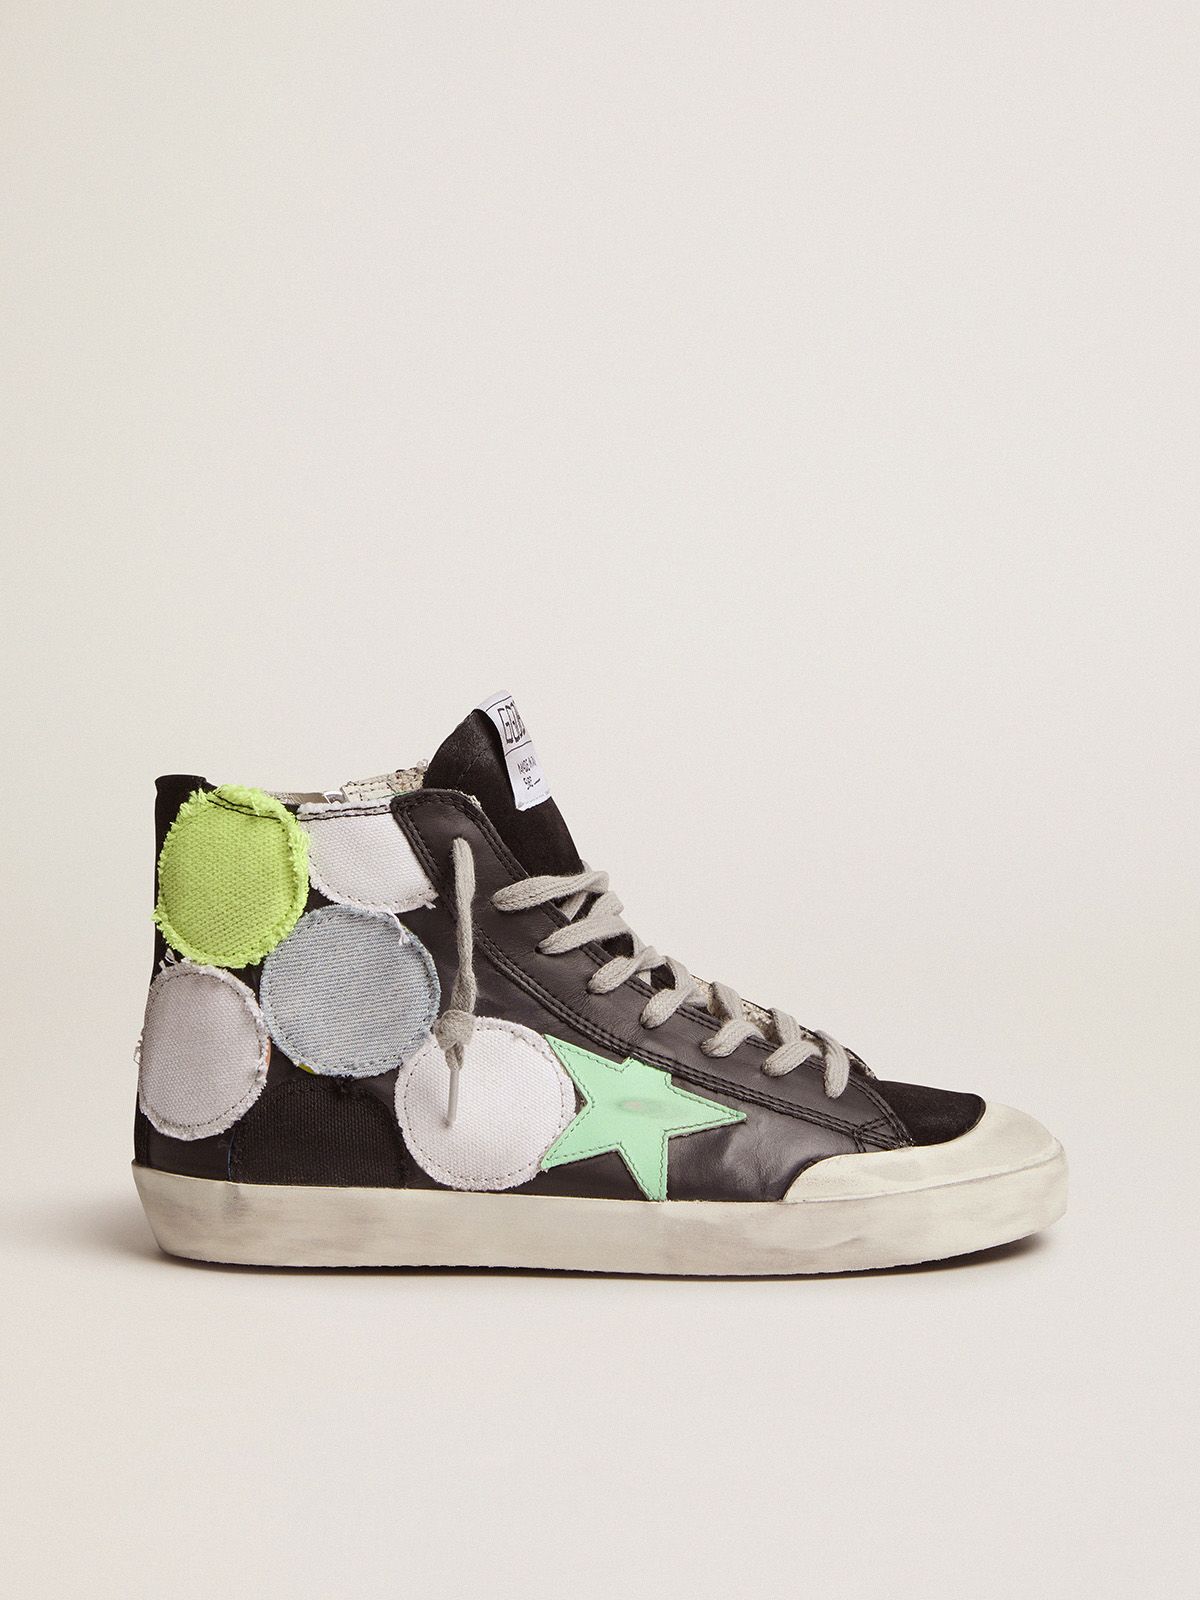 Golden Goose Uomo Saldi Dream Maker Collection Francy Penstar sneakers with coloured polka-dot patches